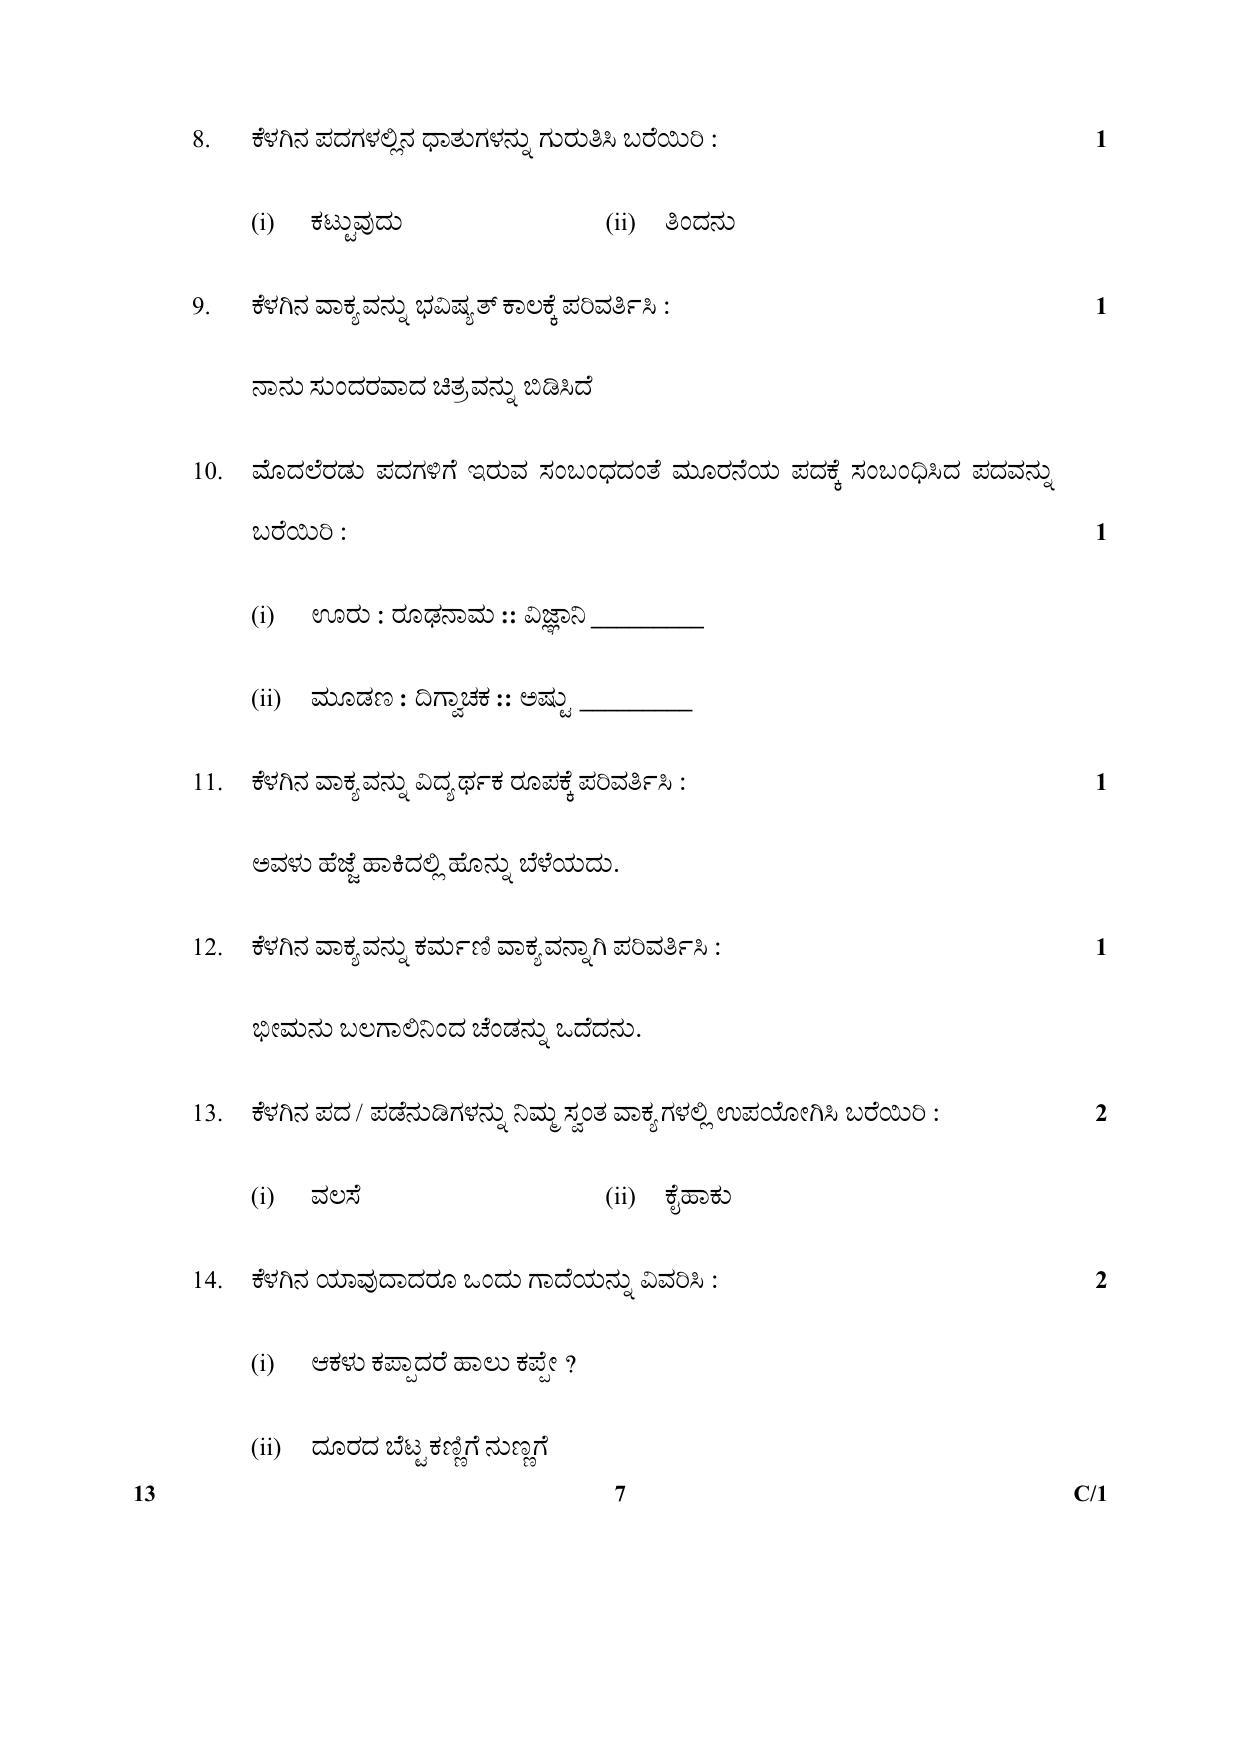 CBSE Class 10 13 (Kannada) 2018 Compartment Question Paper - Page 7